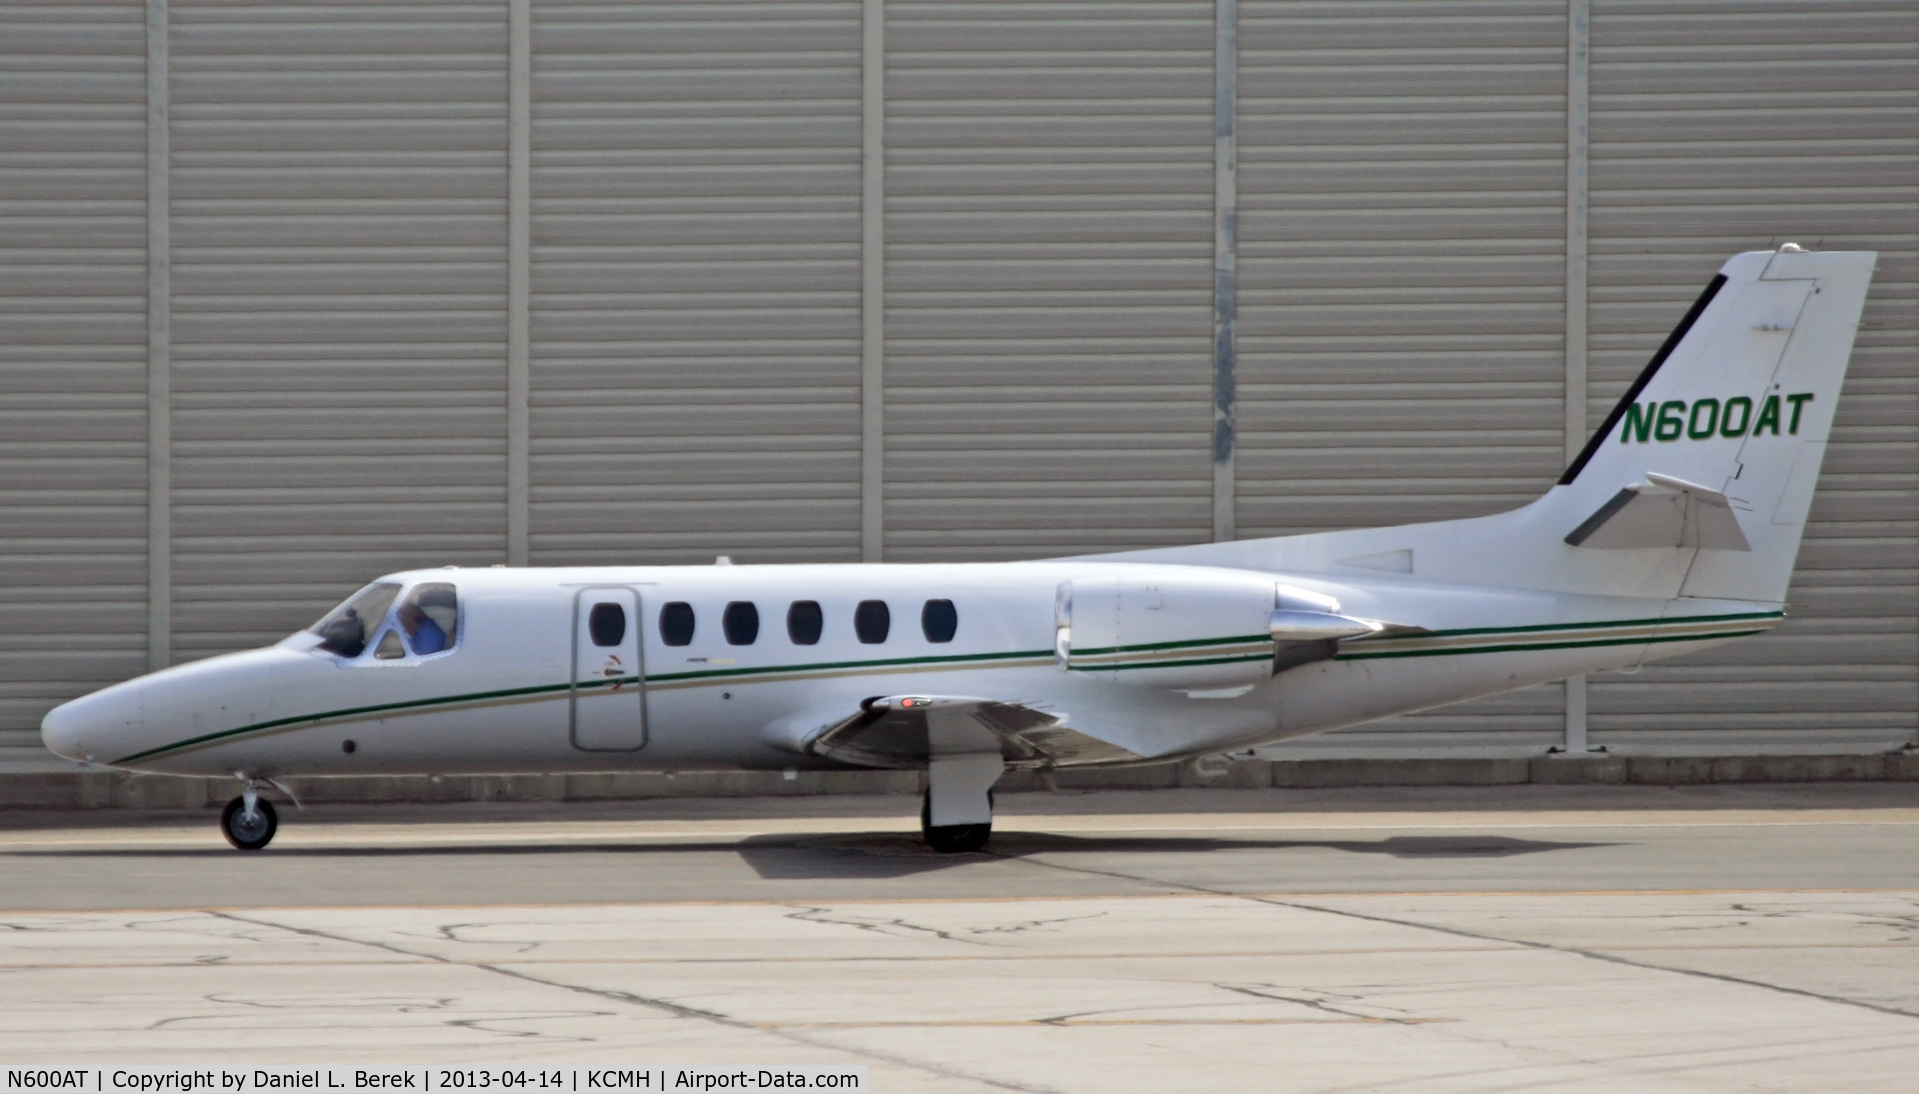 N600AT, 1987 Cessna 550 C/N 550-0551, Spotted at Port Columbus International Airport.